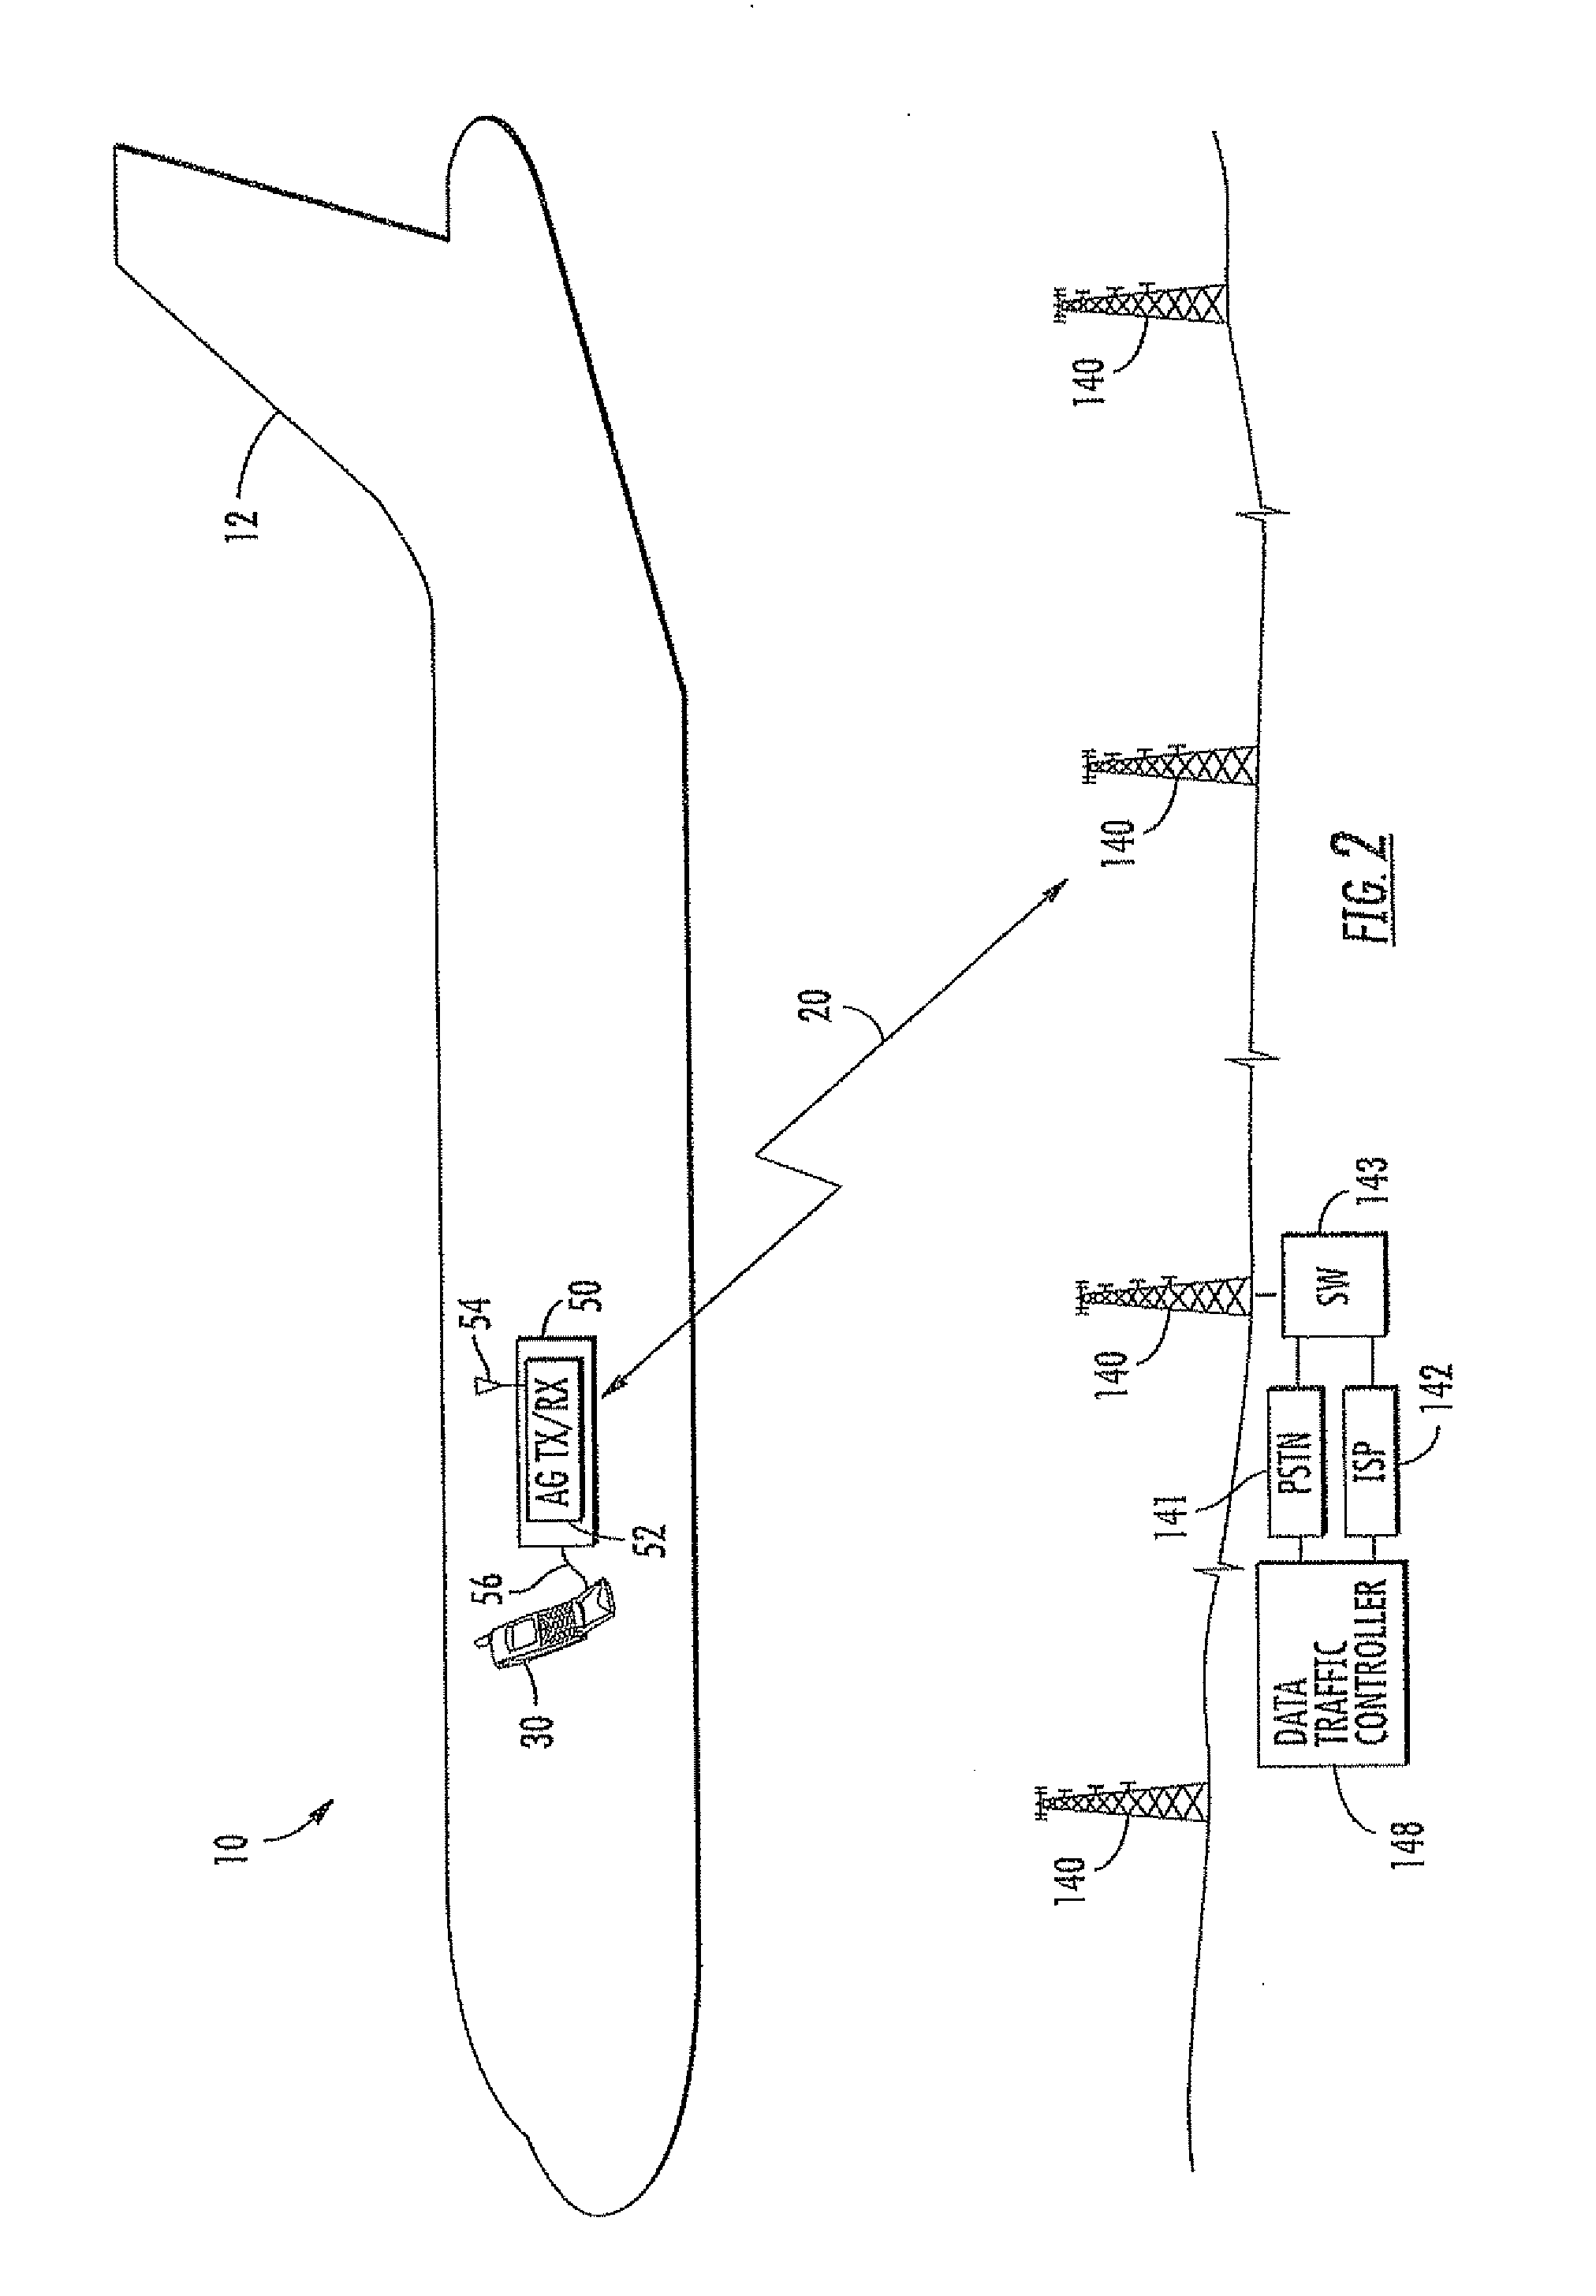 Aircraft communications system with video file library and associated methods